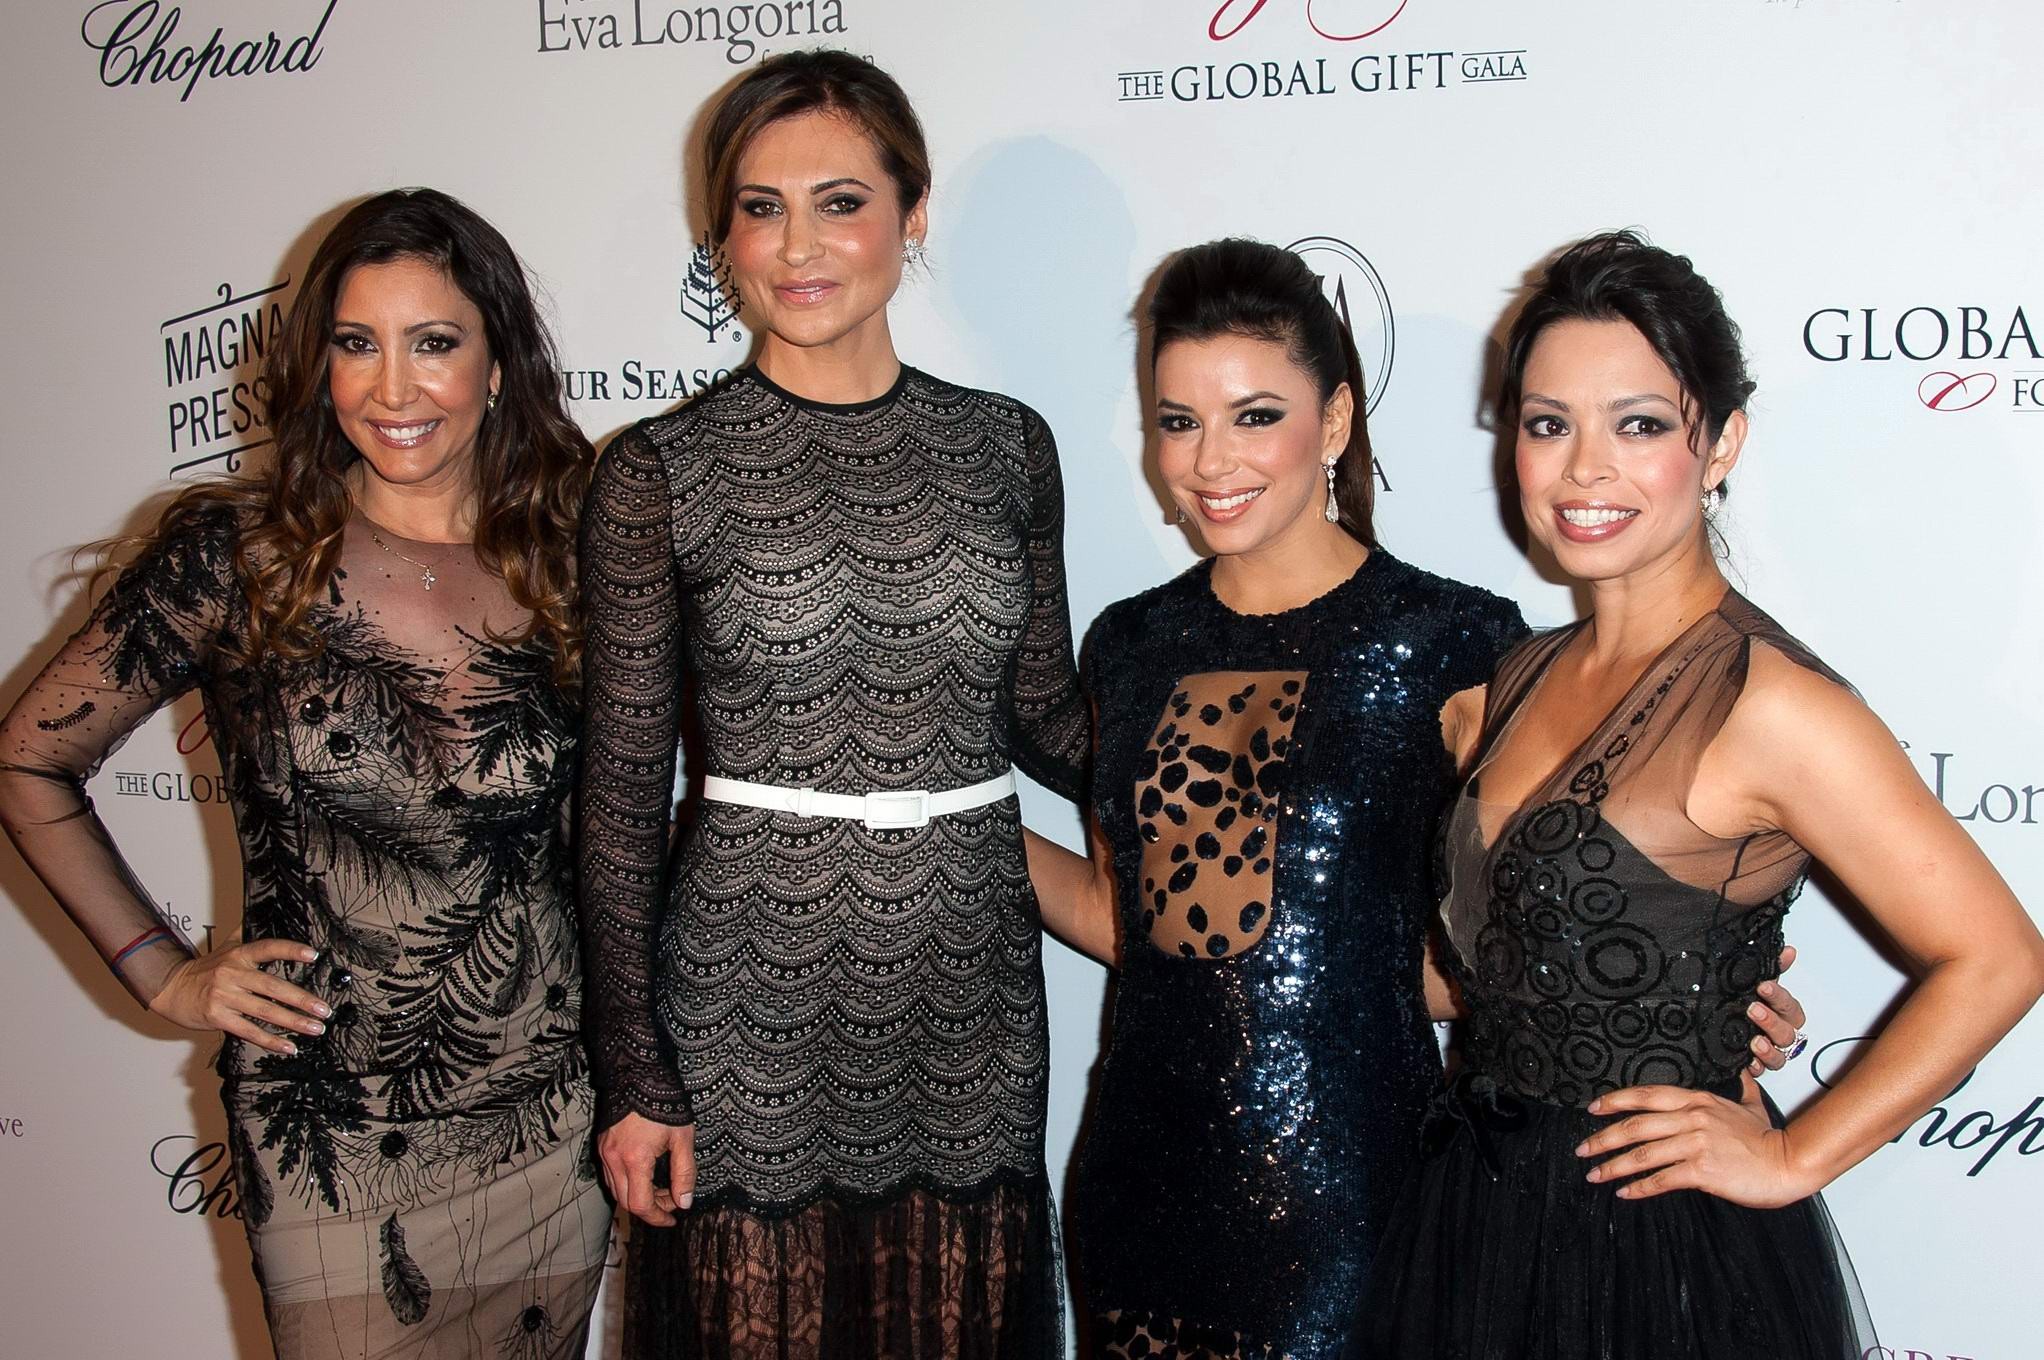 Eva Longoria looks hot wearing a partially see through dress at the 2013 Global  #75232182